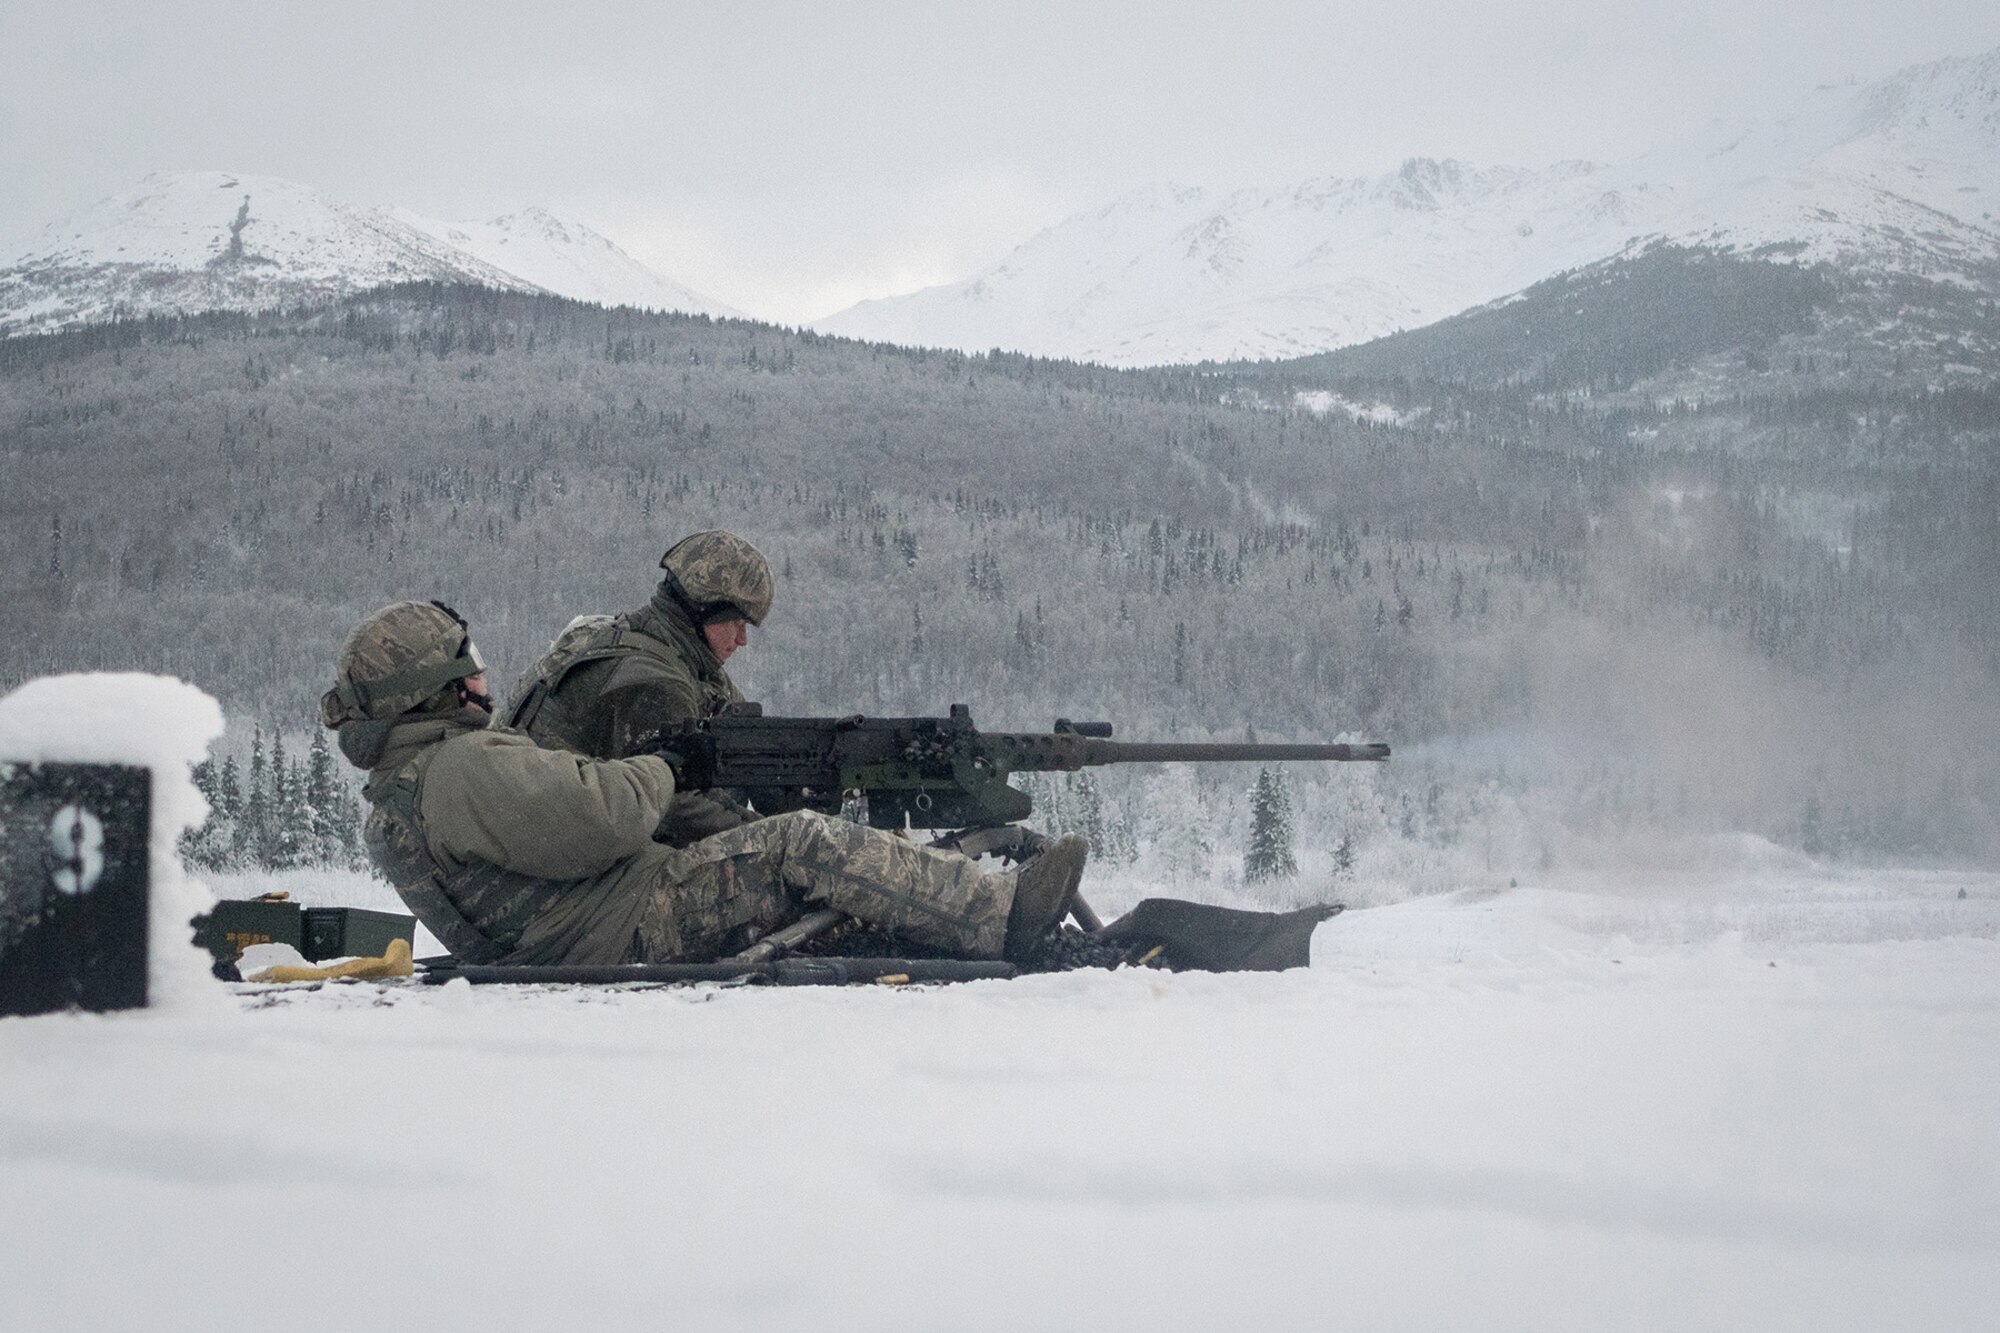 Airmen assigned to the 673d Security Forces Squadron conduct an M2 .50 Caliber machine gun qualification range on Joint Base Elmendorf-Richardson, Alaska, Jan. 10, 2018. Security Forces Airmen perform extensive training in law enforcement as well as combat tactics to protect U.S. Military bases and assets both stateside and overseas.